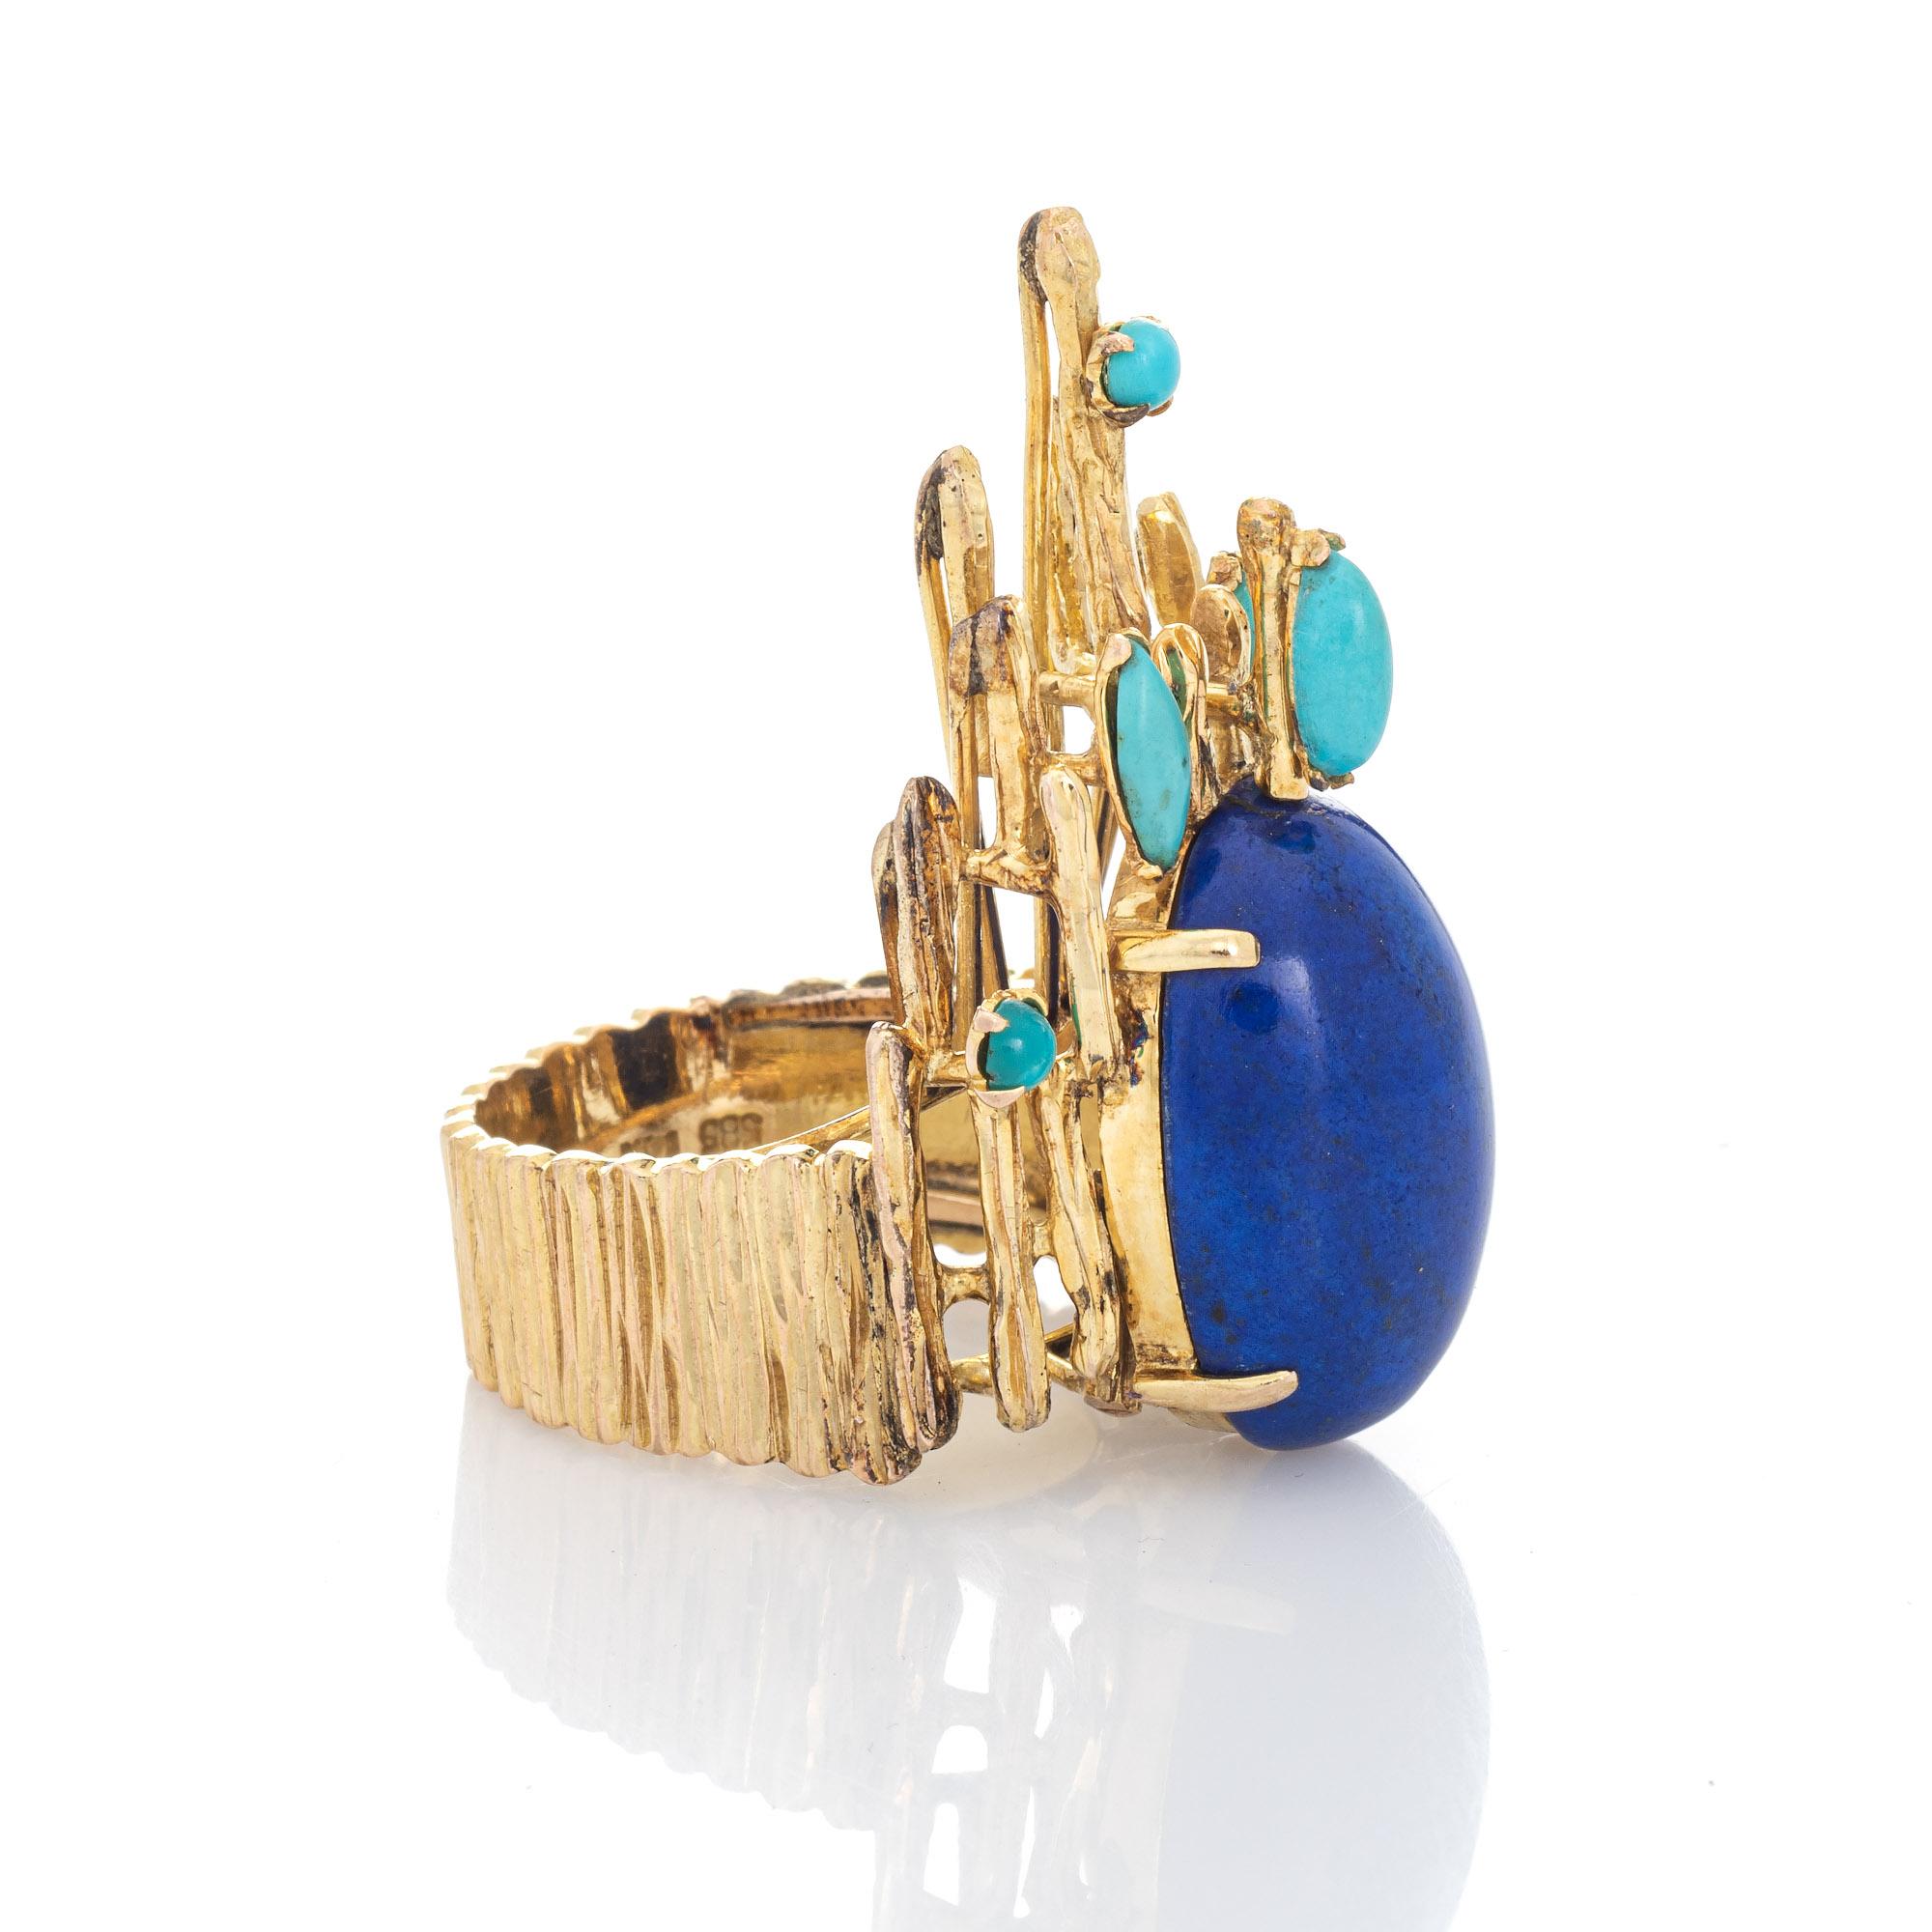 Stylish vintage Brutalist turquoise & lapis cocktail ring (circa 1970s) crafted in 14 karat yellow gold. 

Cabochon cut lapis lazuli measures 21.5mm x 14.5mm (estimated at 16 carats), accented with turquoise measuring 3.5mm to 7mm x 3mm. The lapis &